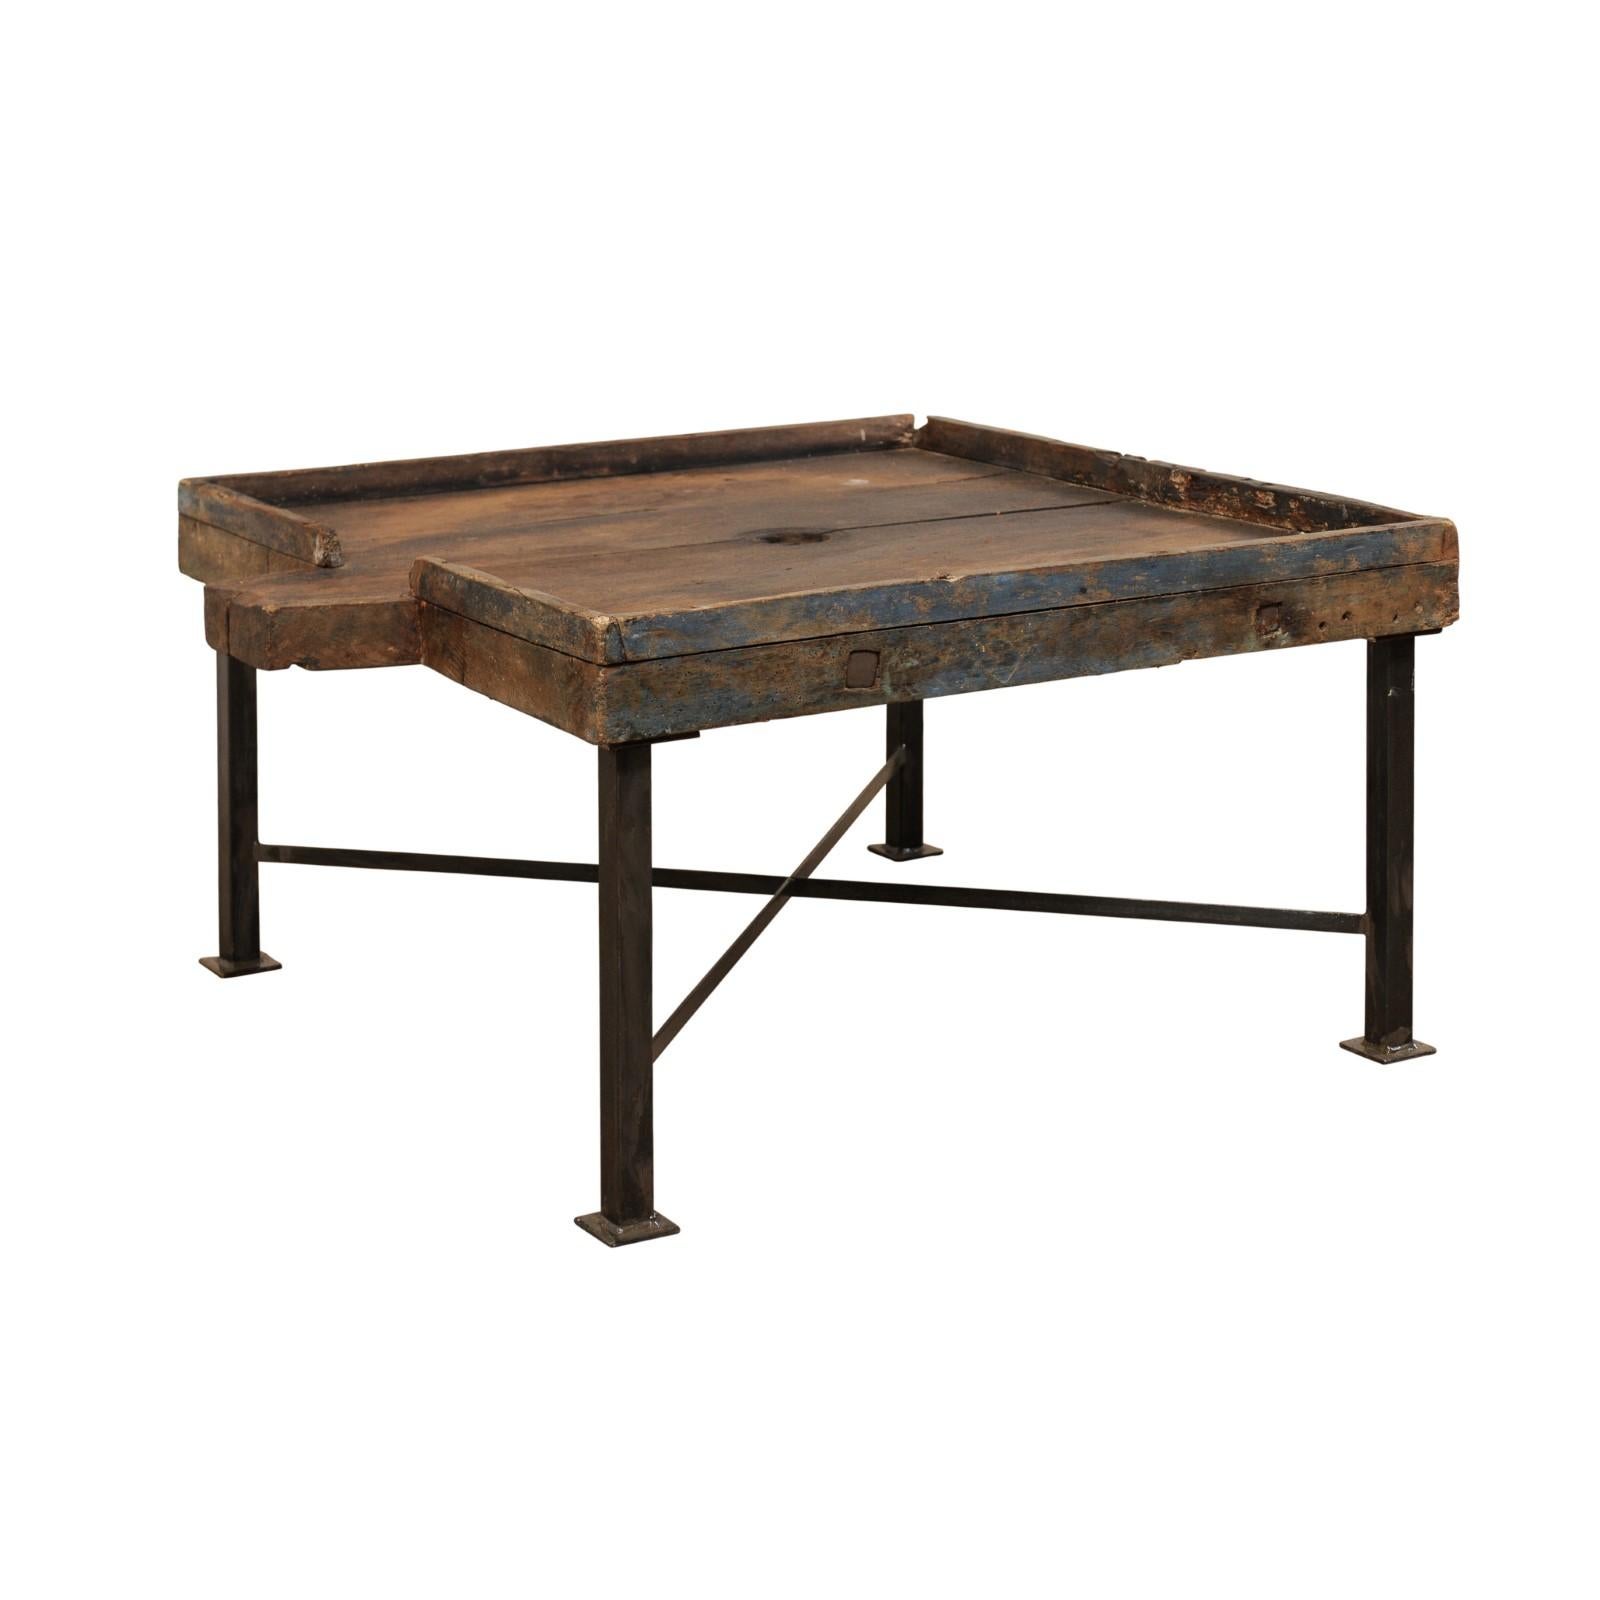 19th Century Spanish Wood Olive Trough Coffee Table with Modern Metal Base